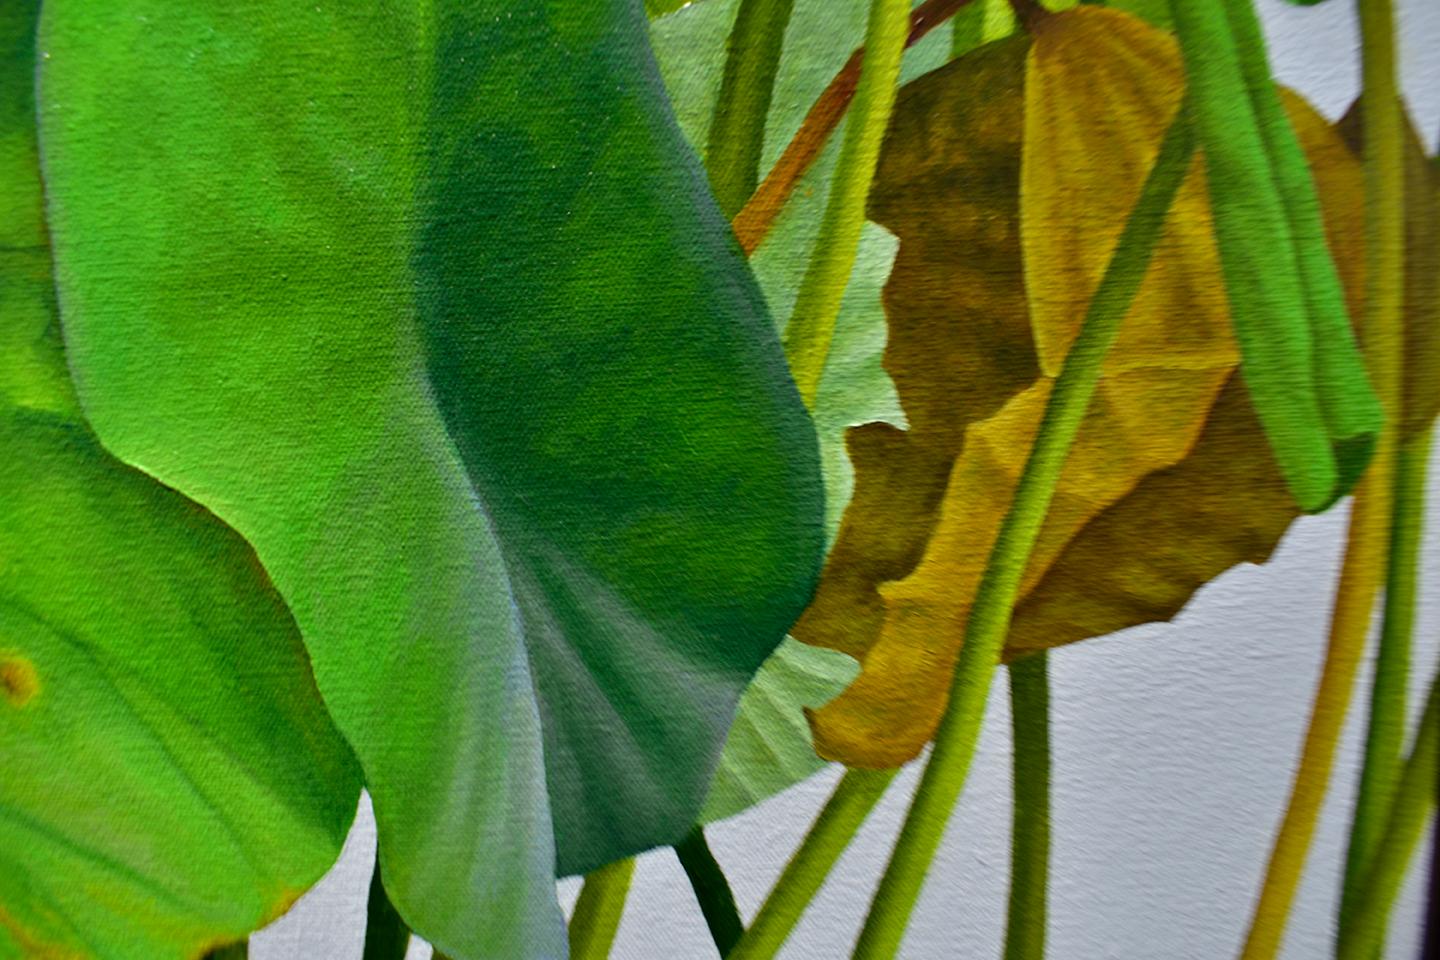 Lotus Number Twenty-Four: Realist Still Life Painting of Bright Green Lotus Plants
Photorealist still life painting of green and soft yellow lotus leaves on a light grey background
